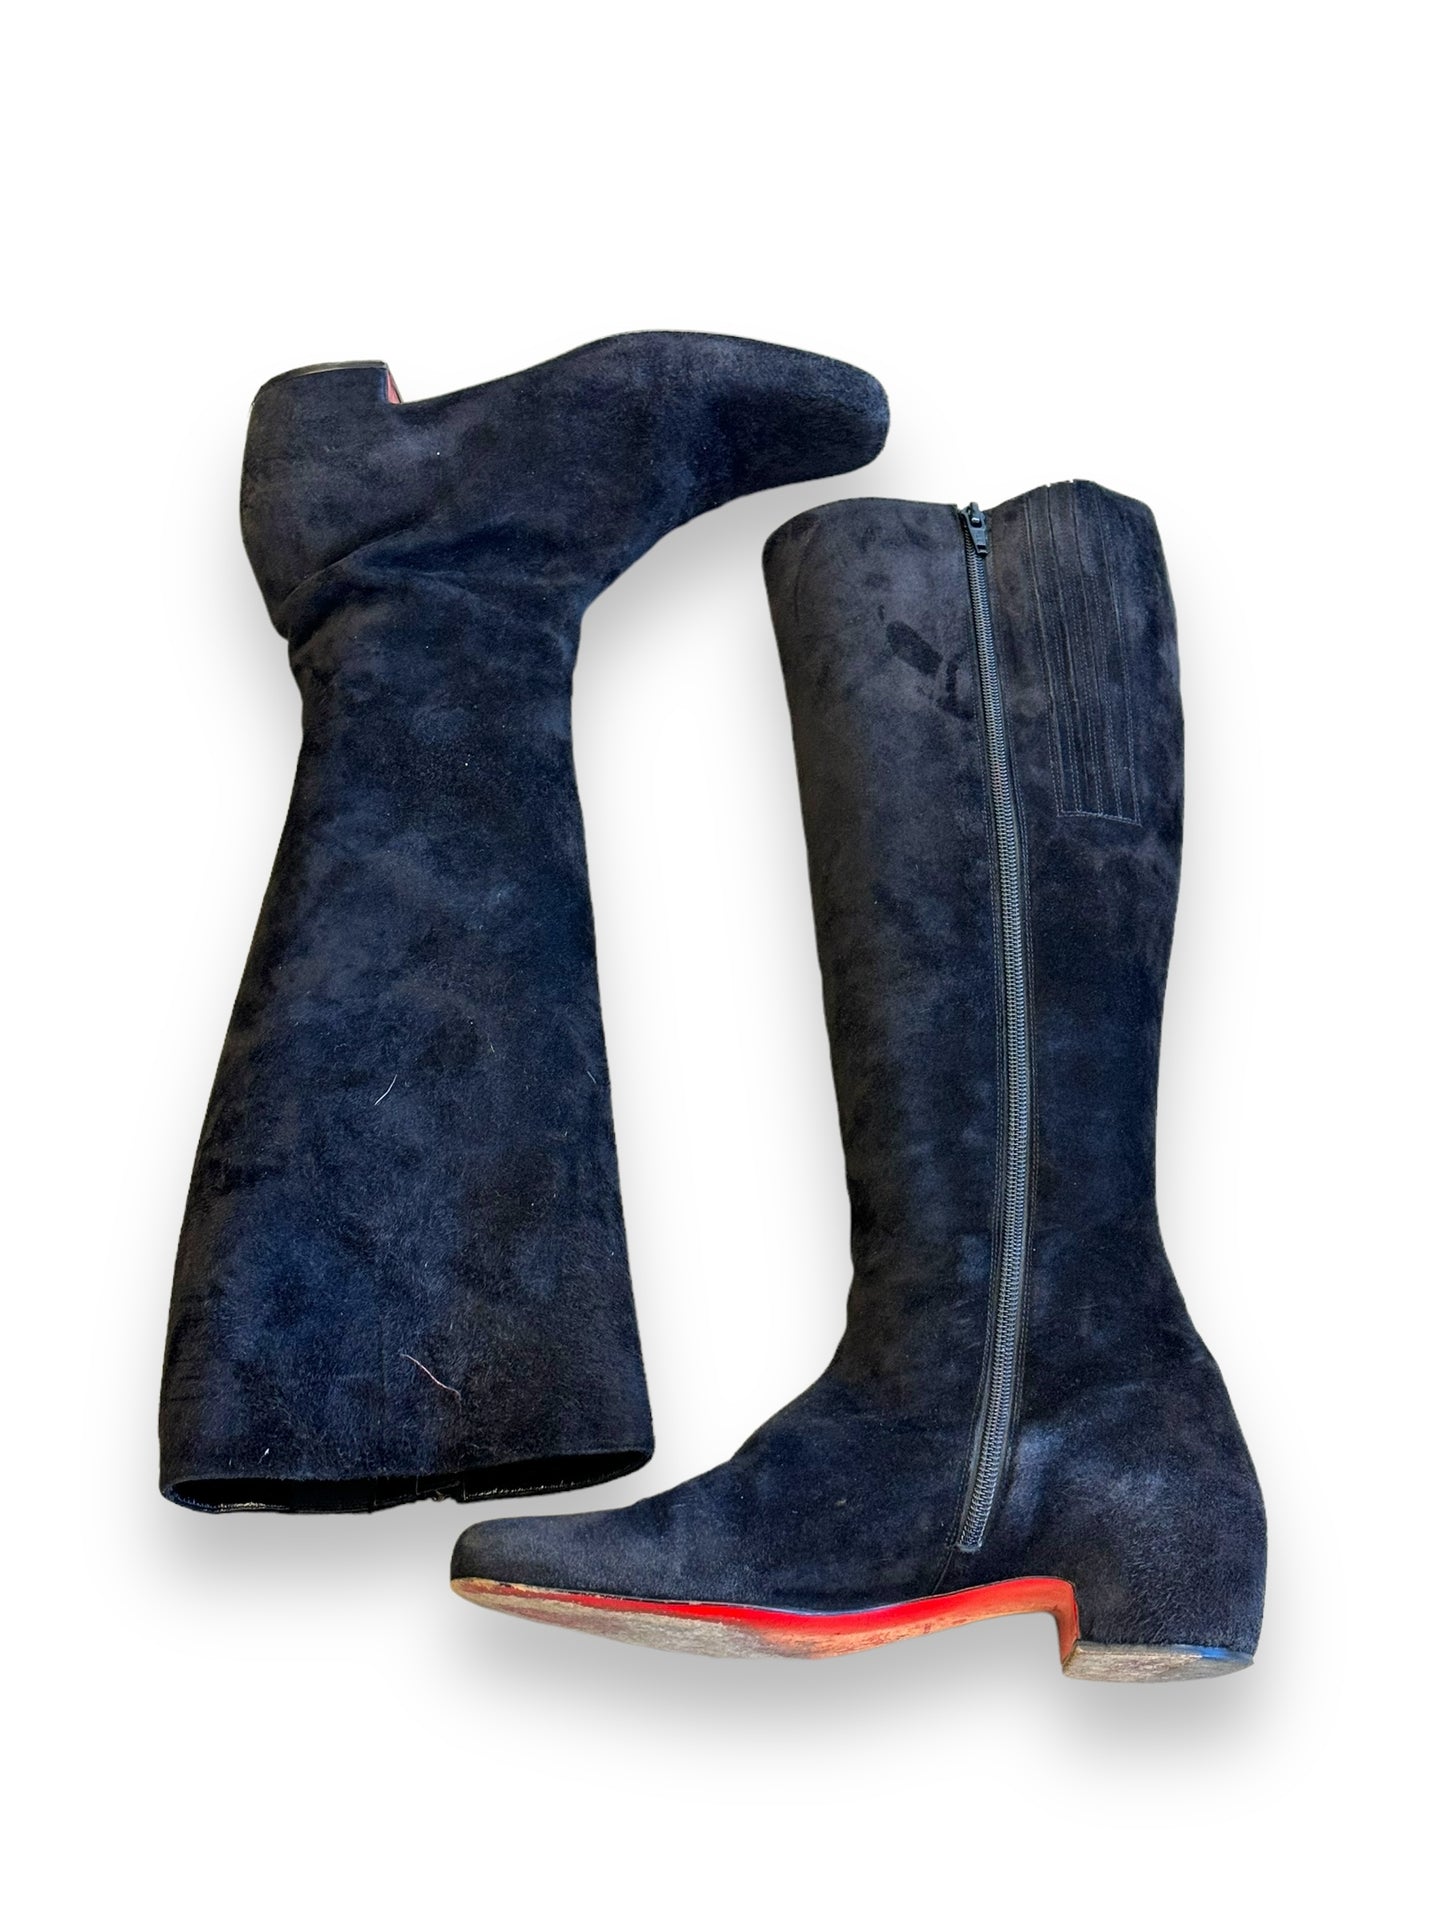 Y2K Christian Louboutin Black Suede Saddle Boots